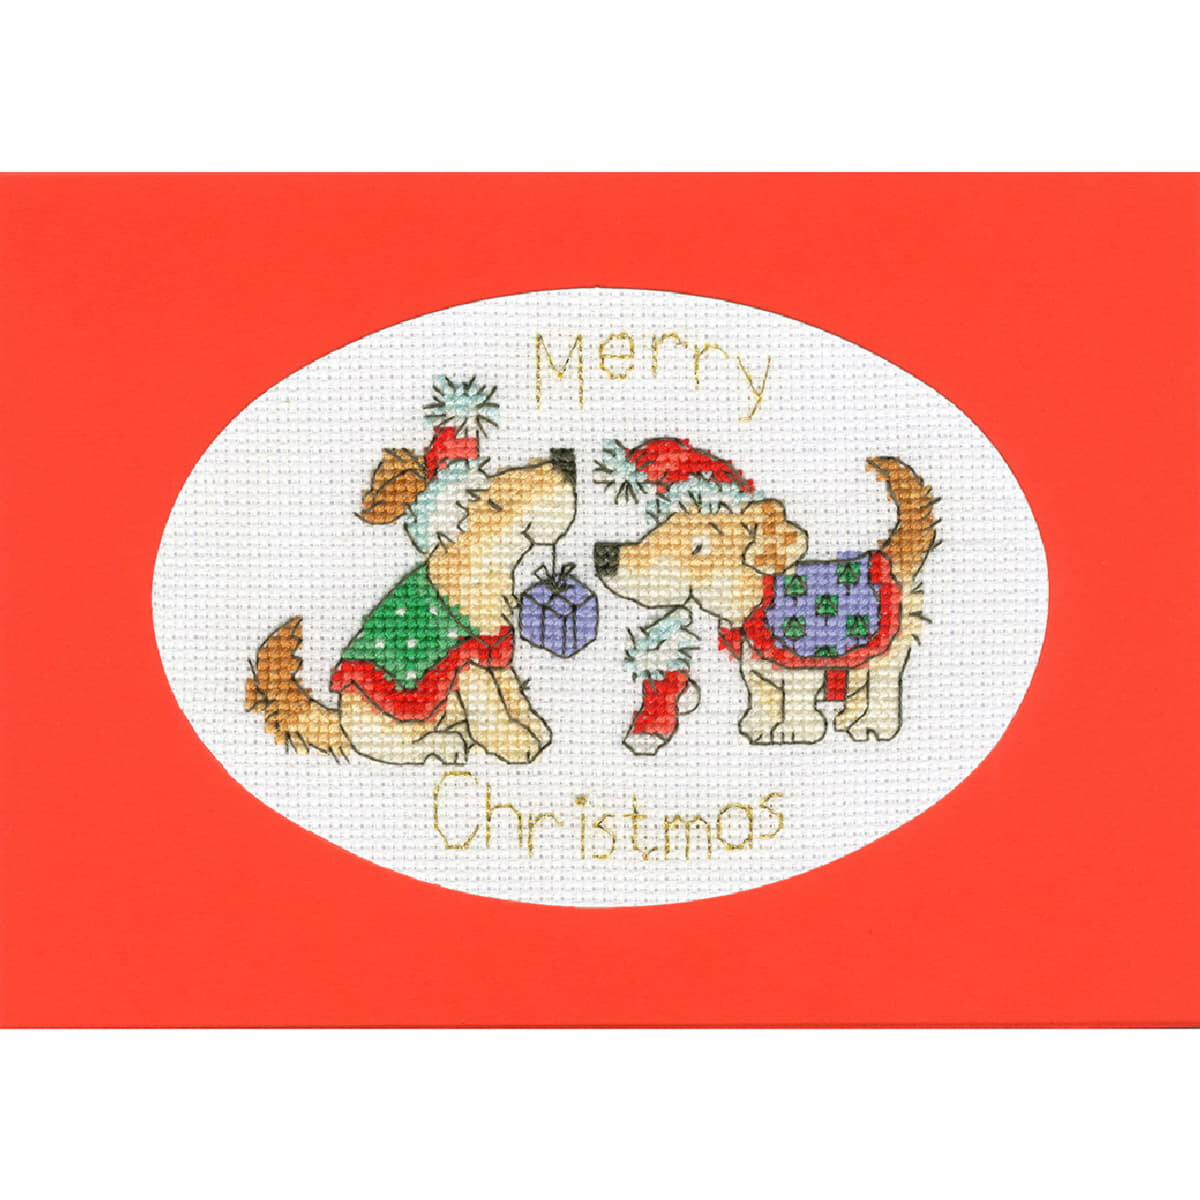 A festive cross stitch Christmas card from Bothy Threads...